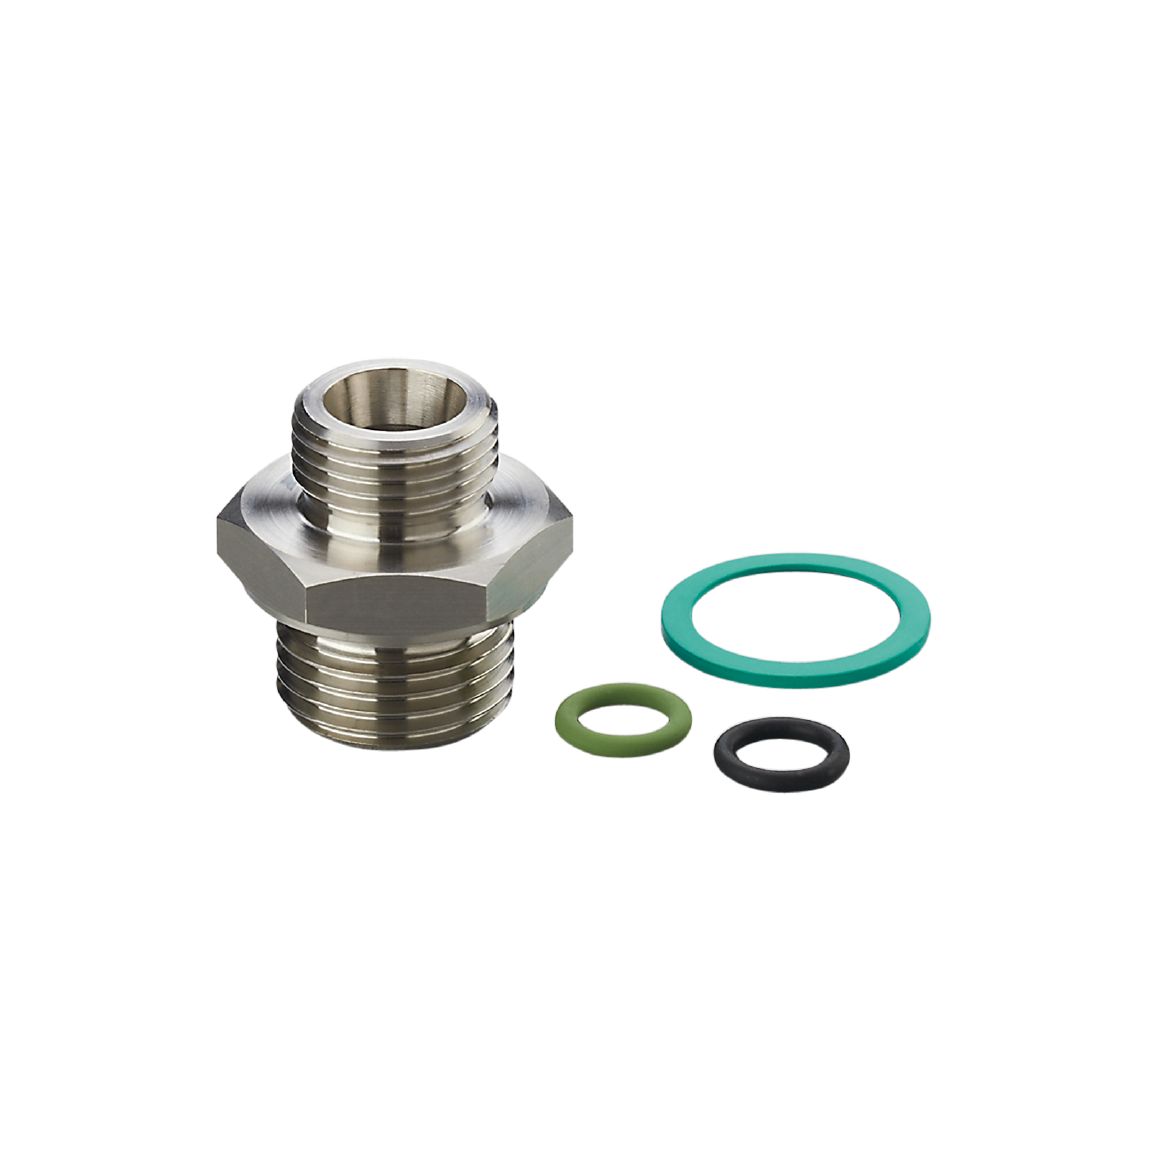 E30418 - Screw-in adapter for process sensors - ifm